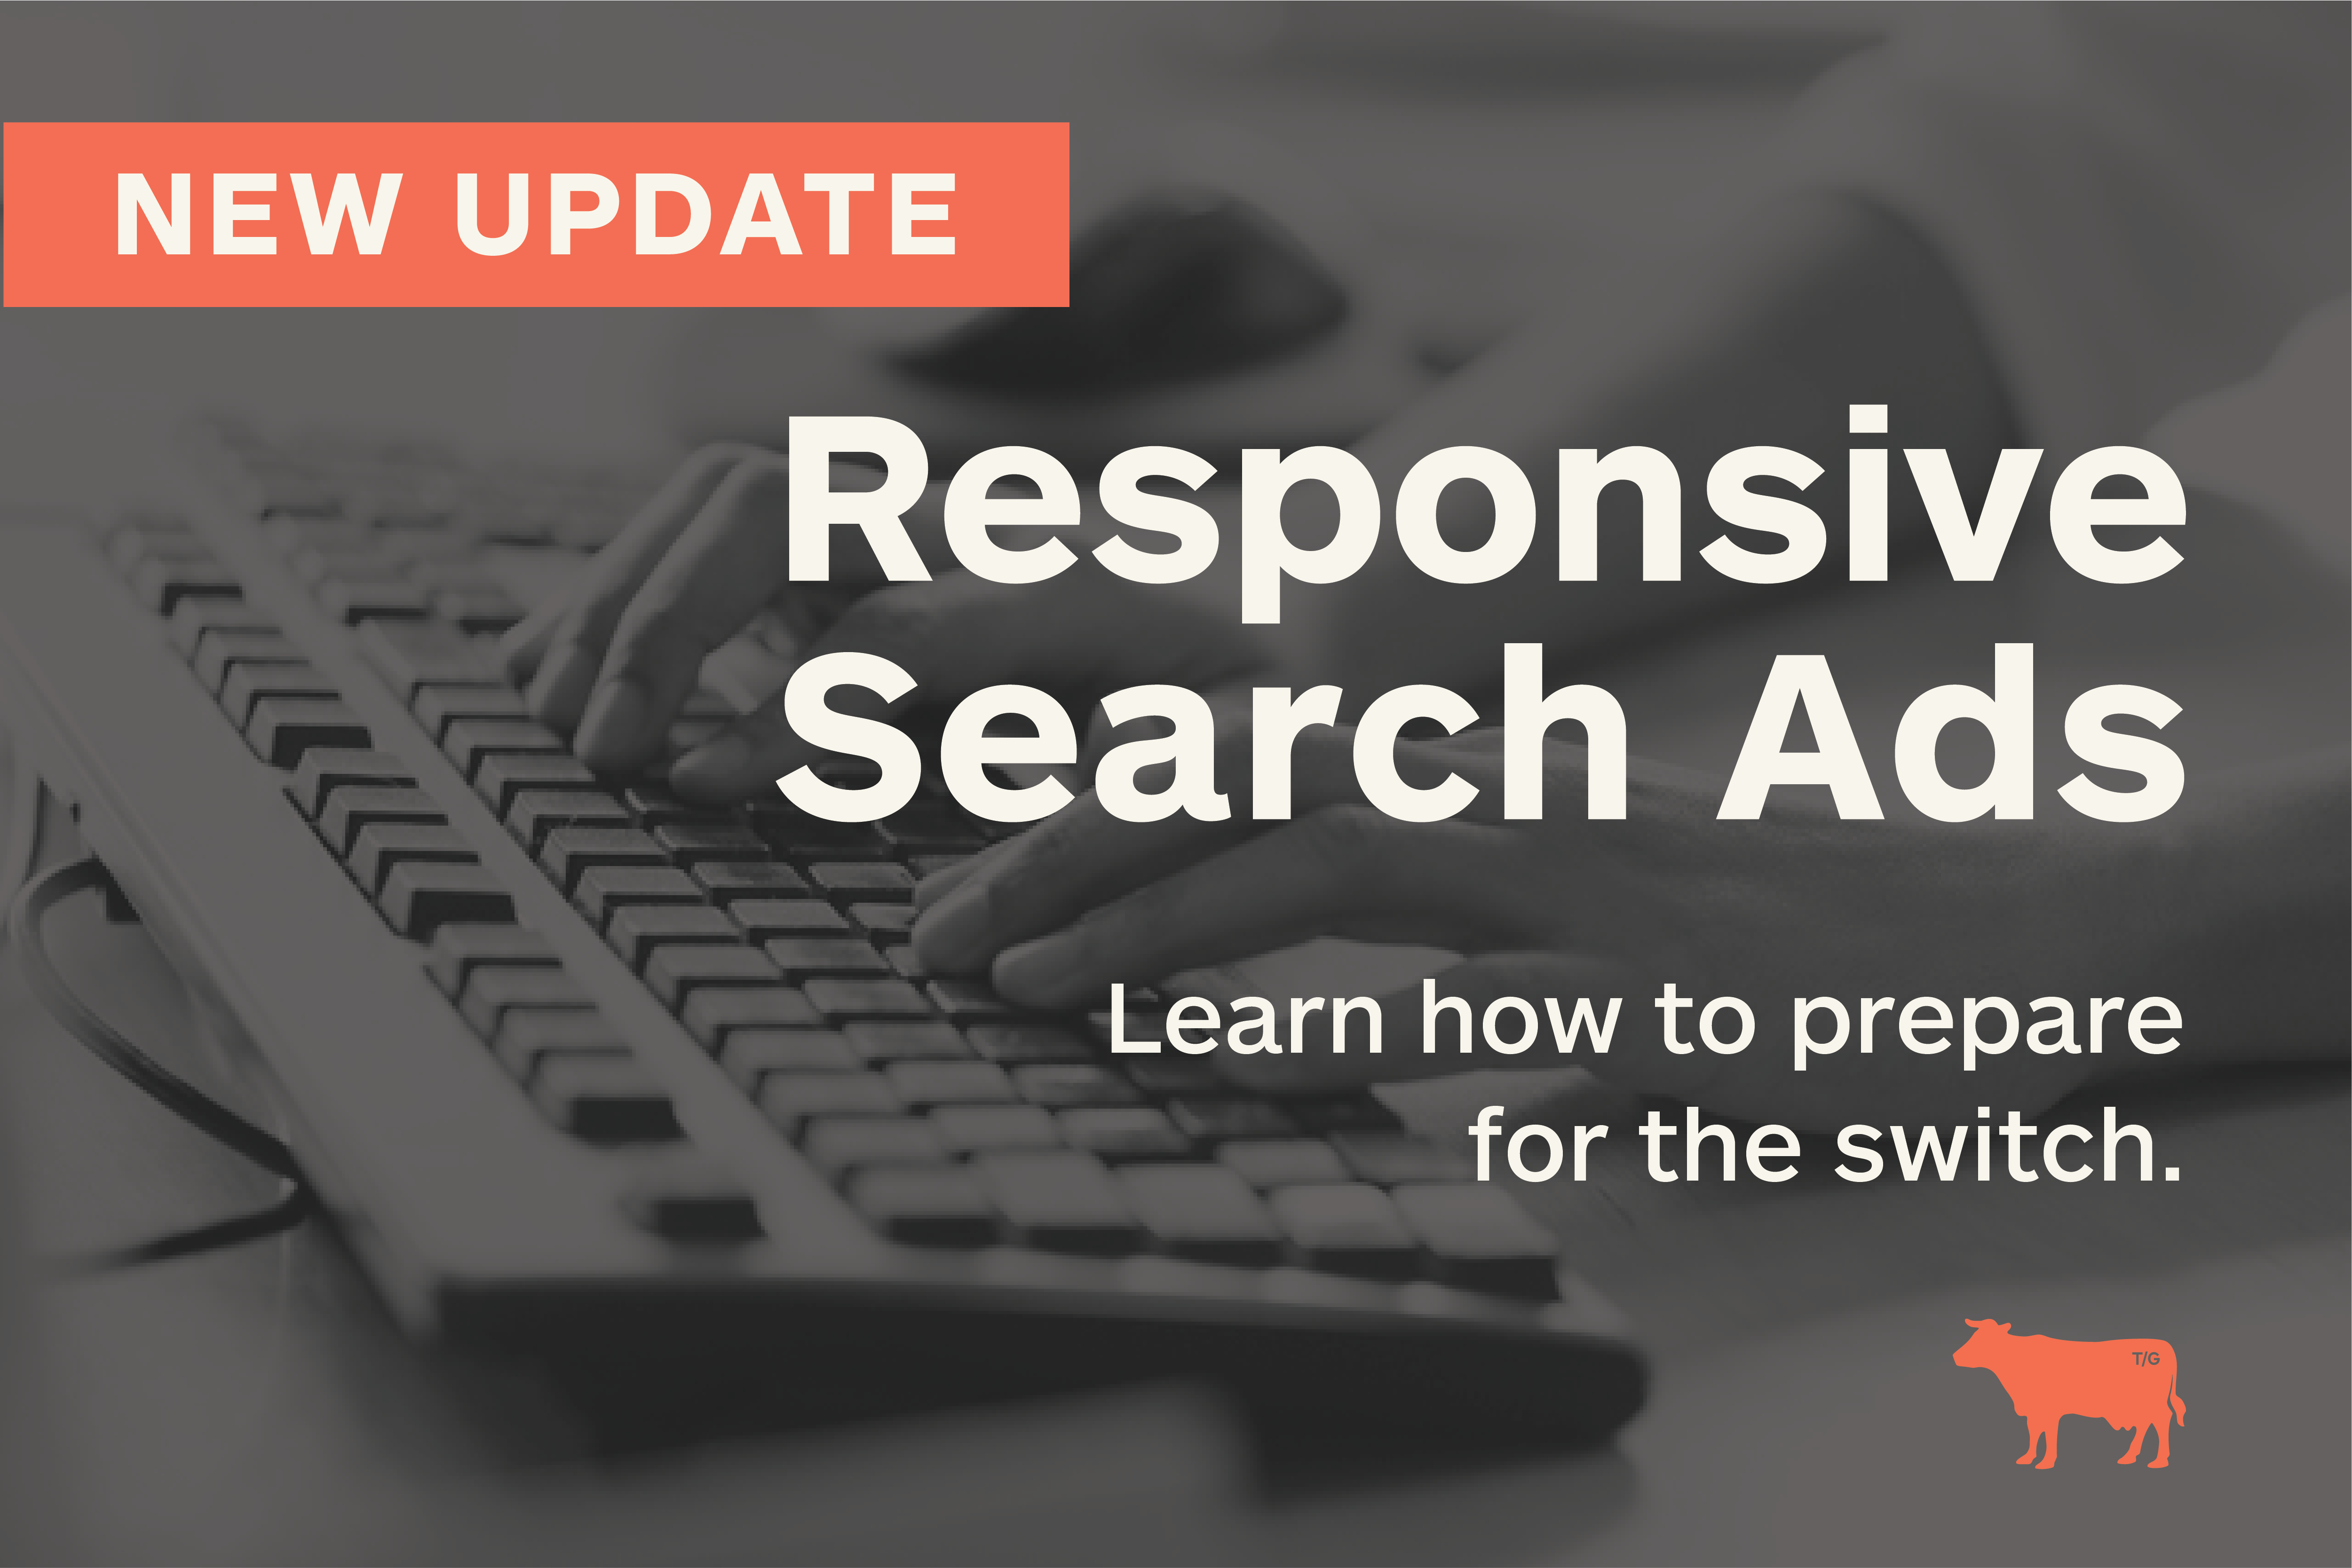 Responsive Search Ads - How to prepare for the change